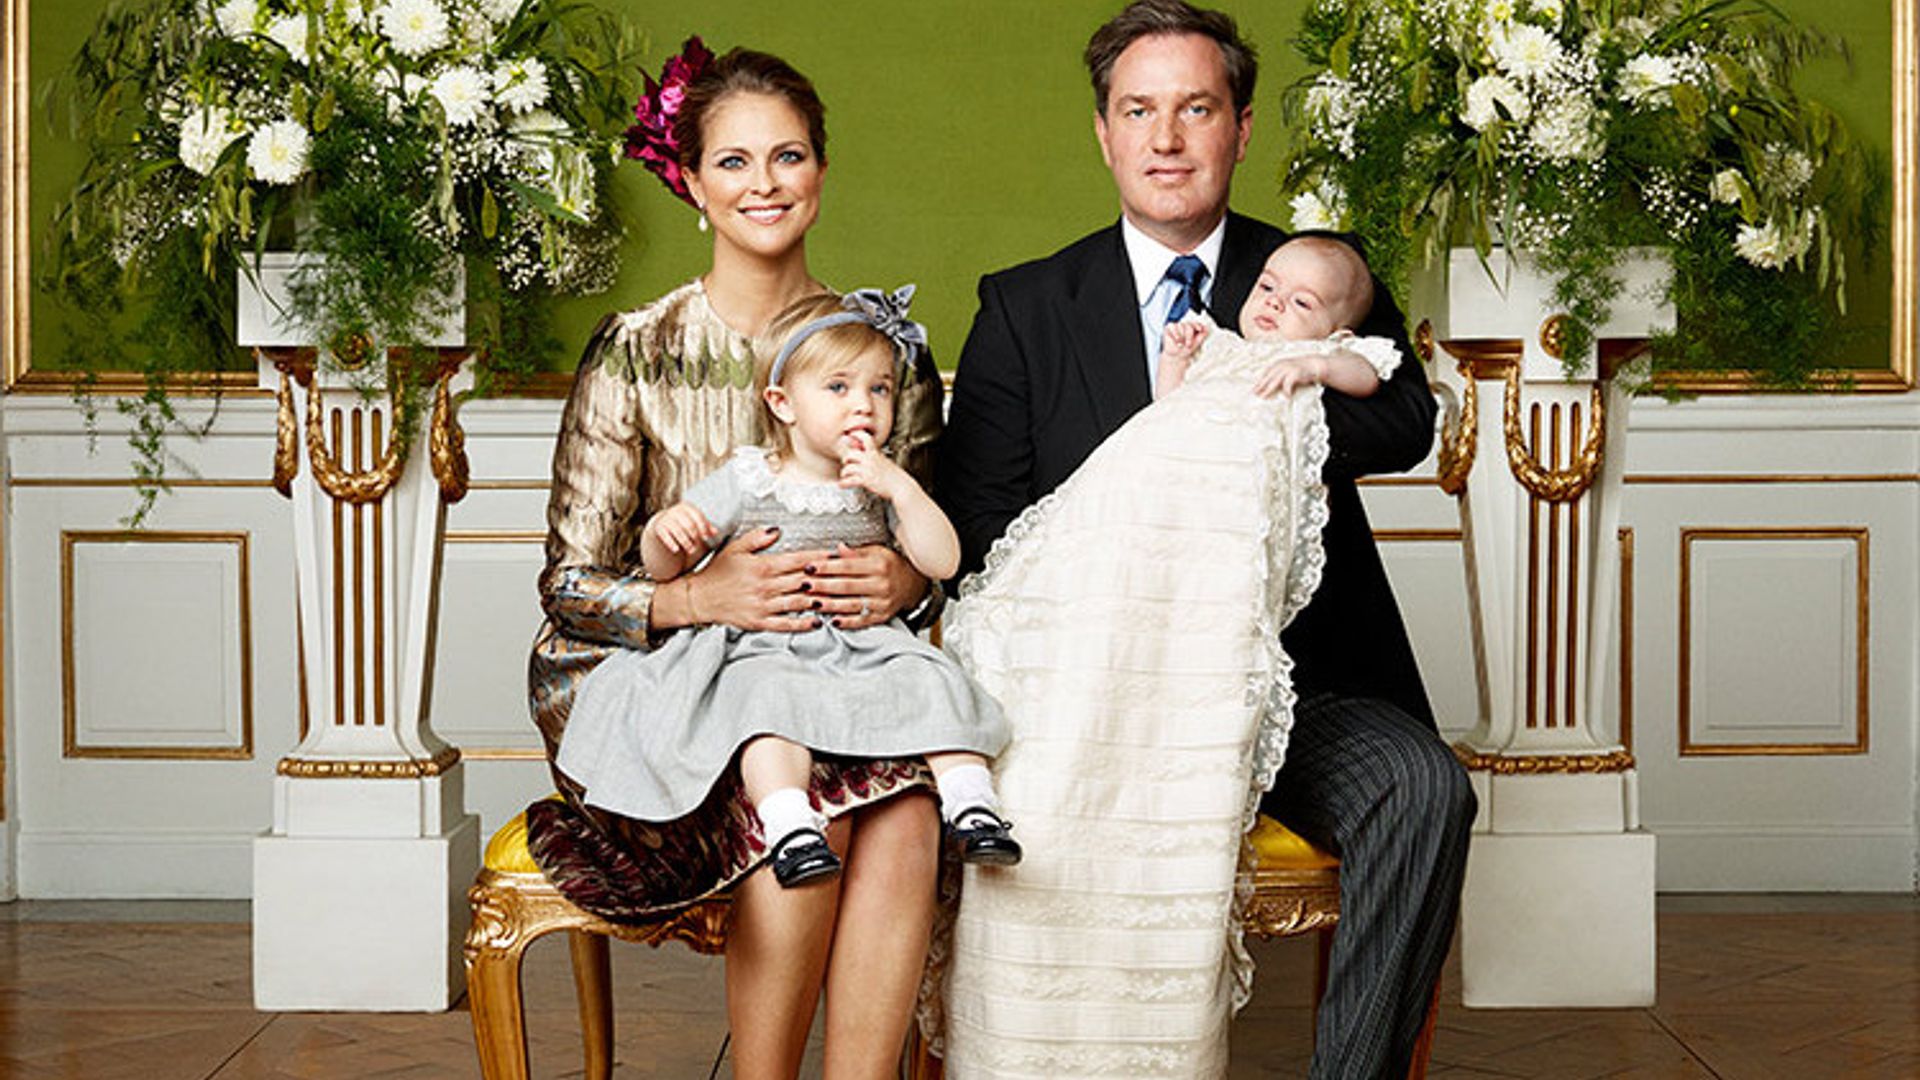 Prince Nicolas of Sweden's christening: First official photos